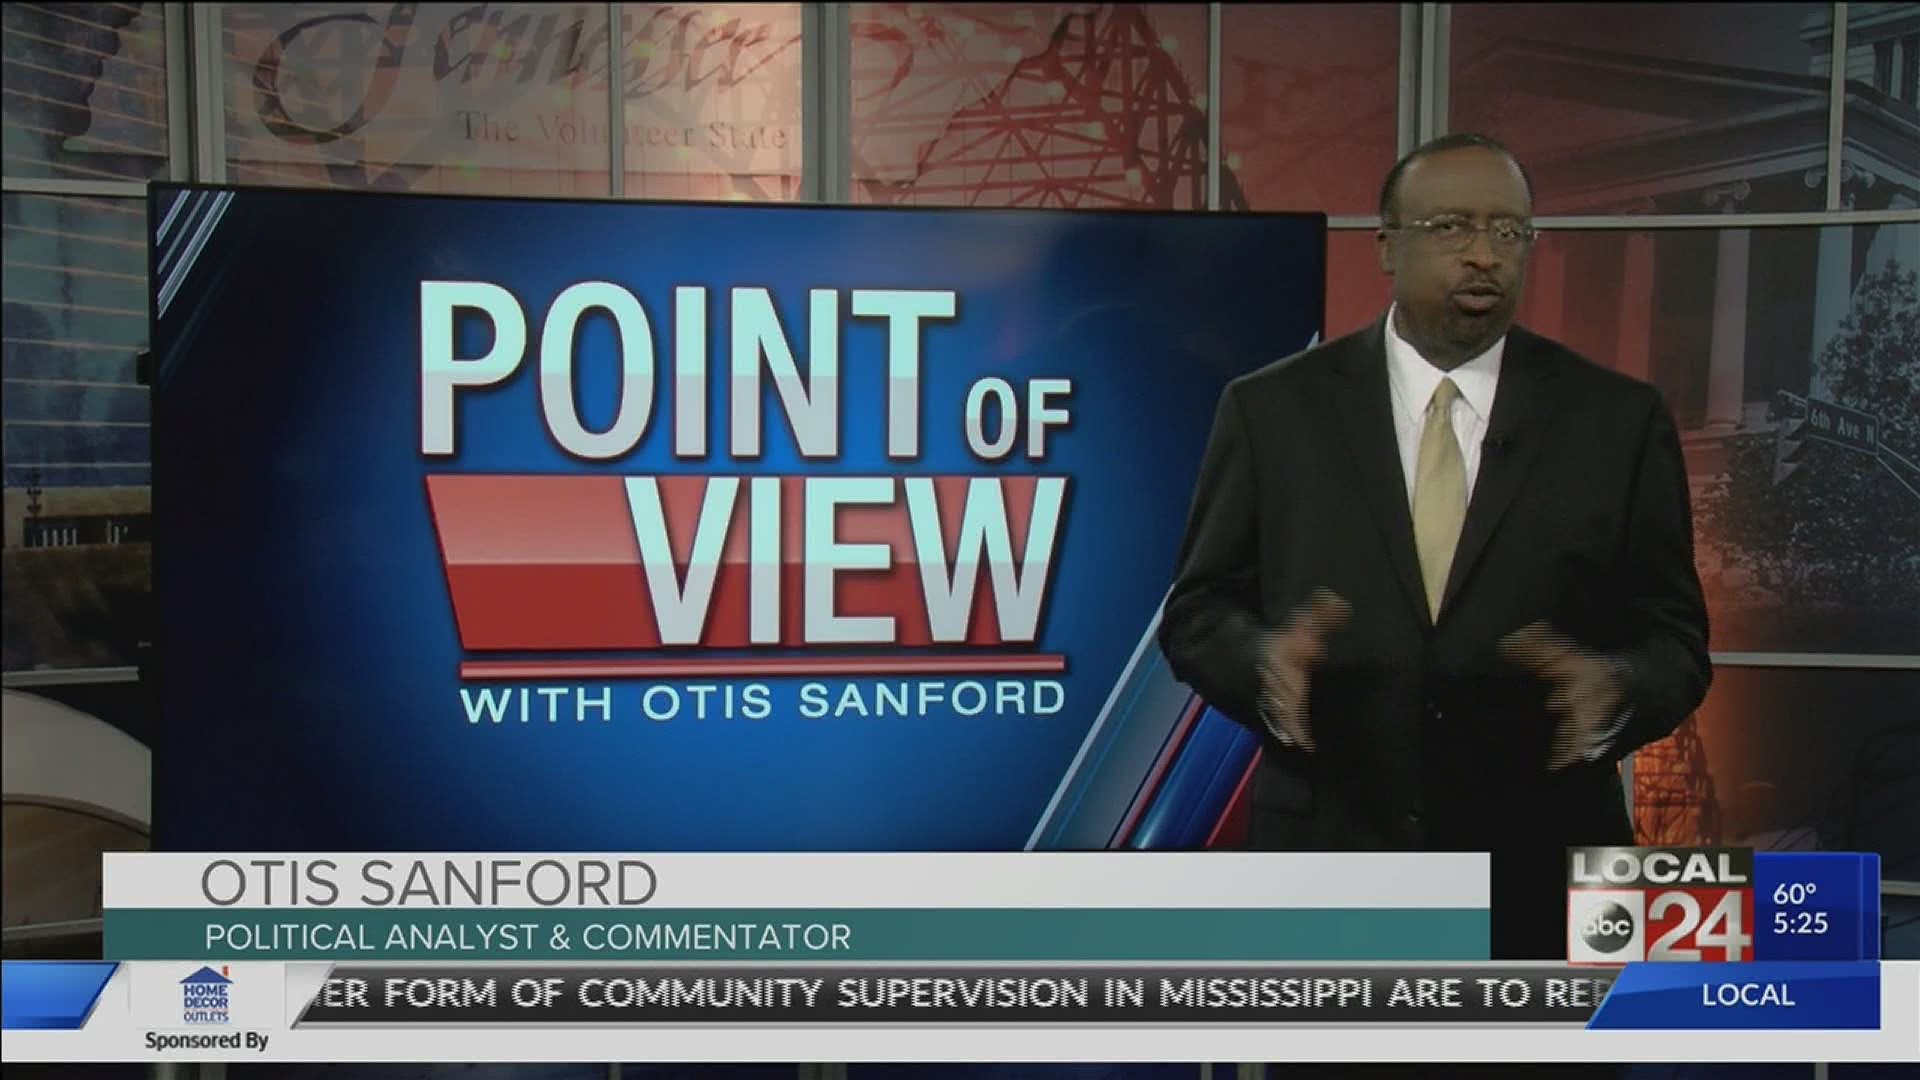 Local 24 News political analyst and commentator Otis Sanford shares his point of view on social distancing at Memphis parks.